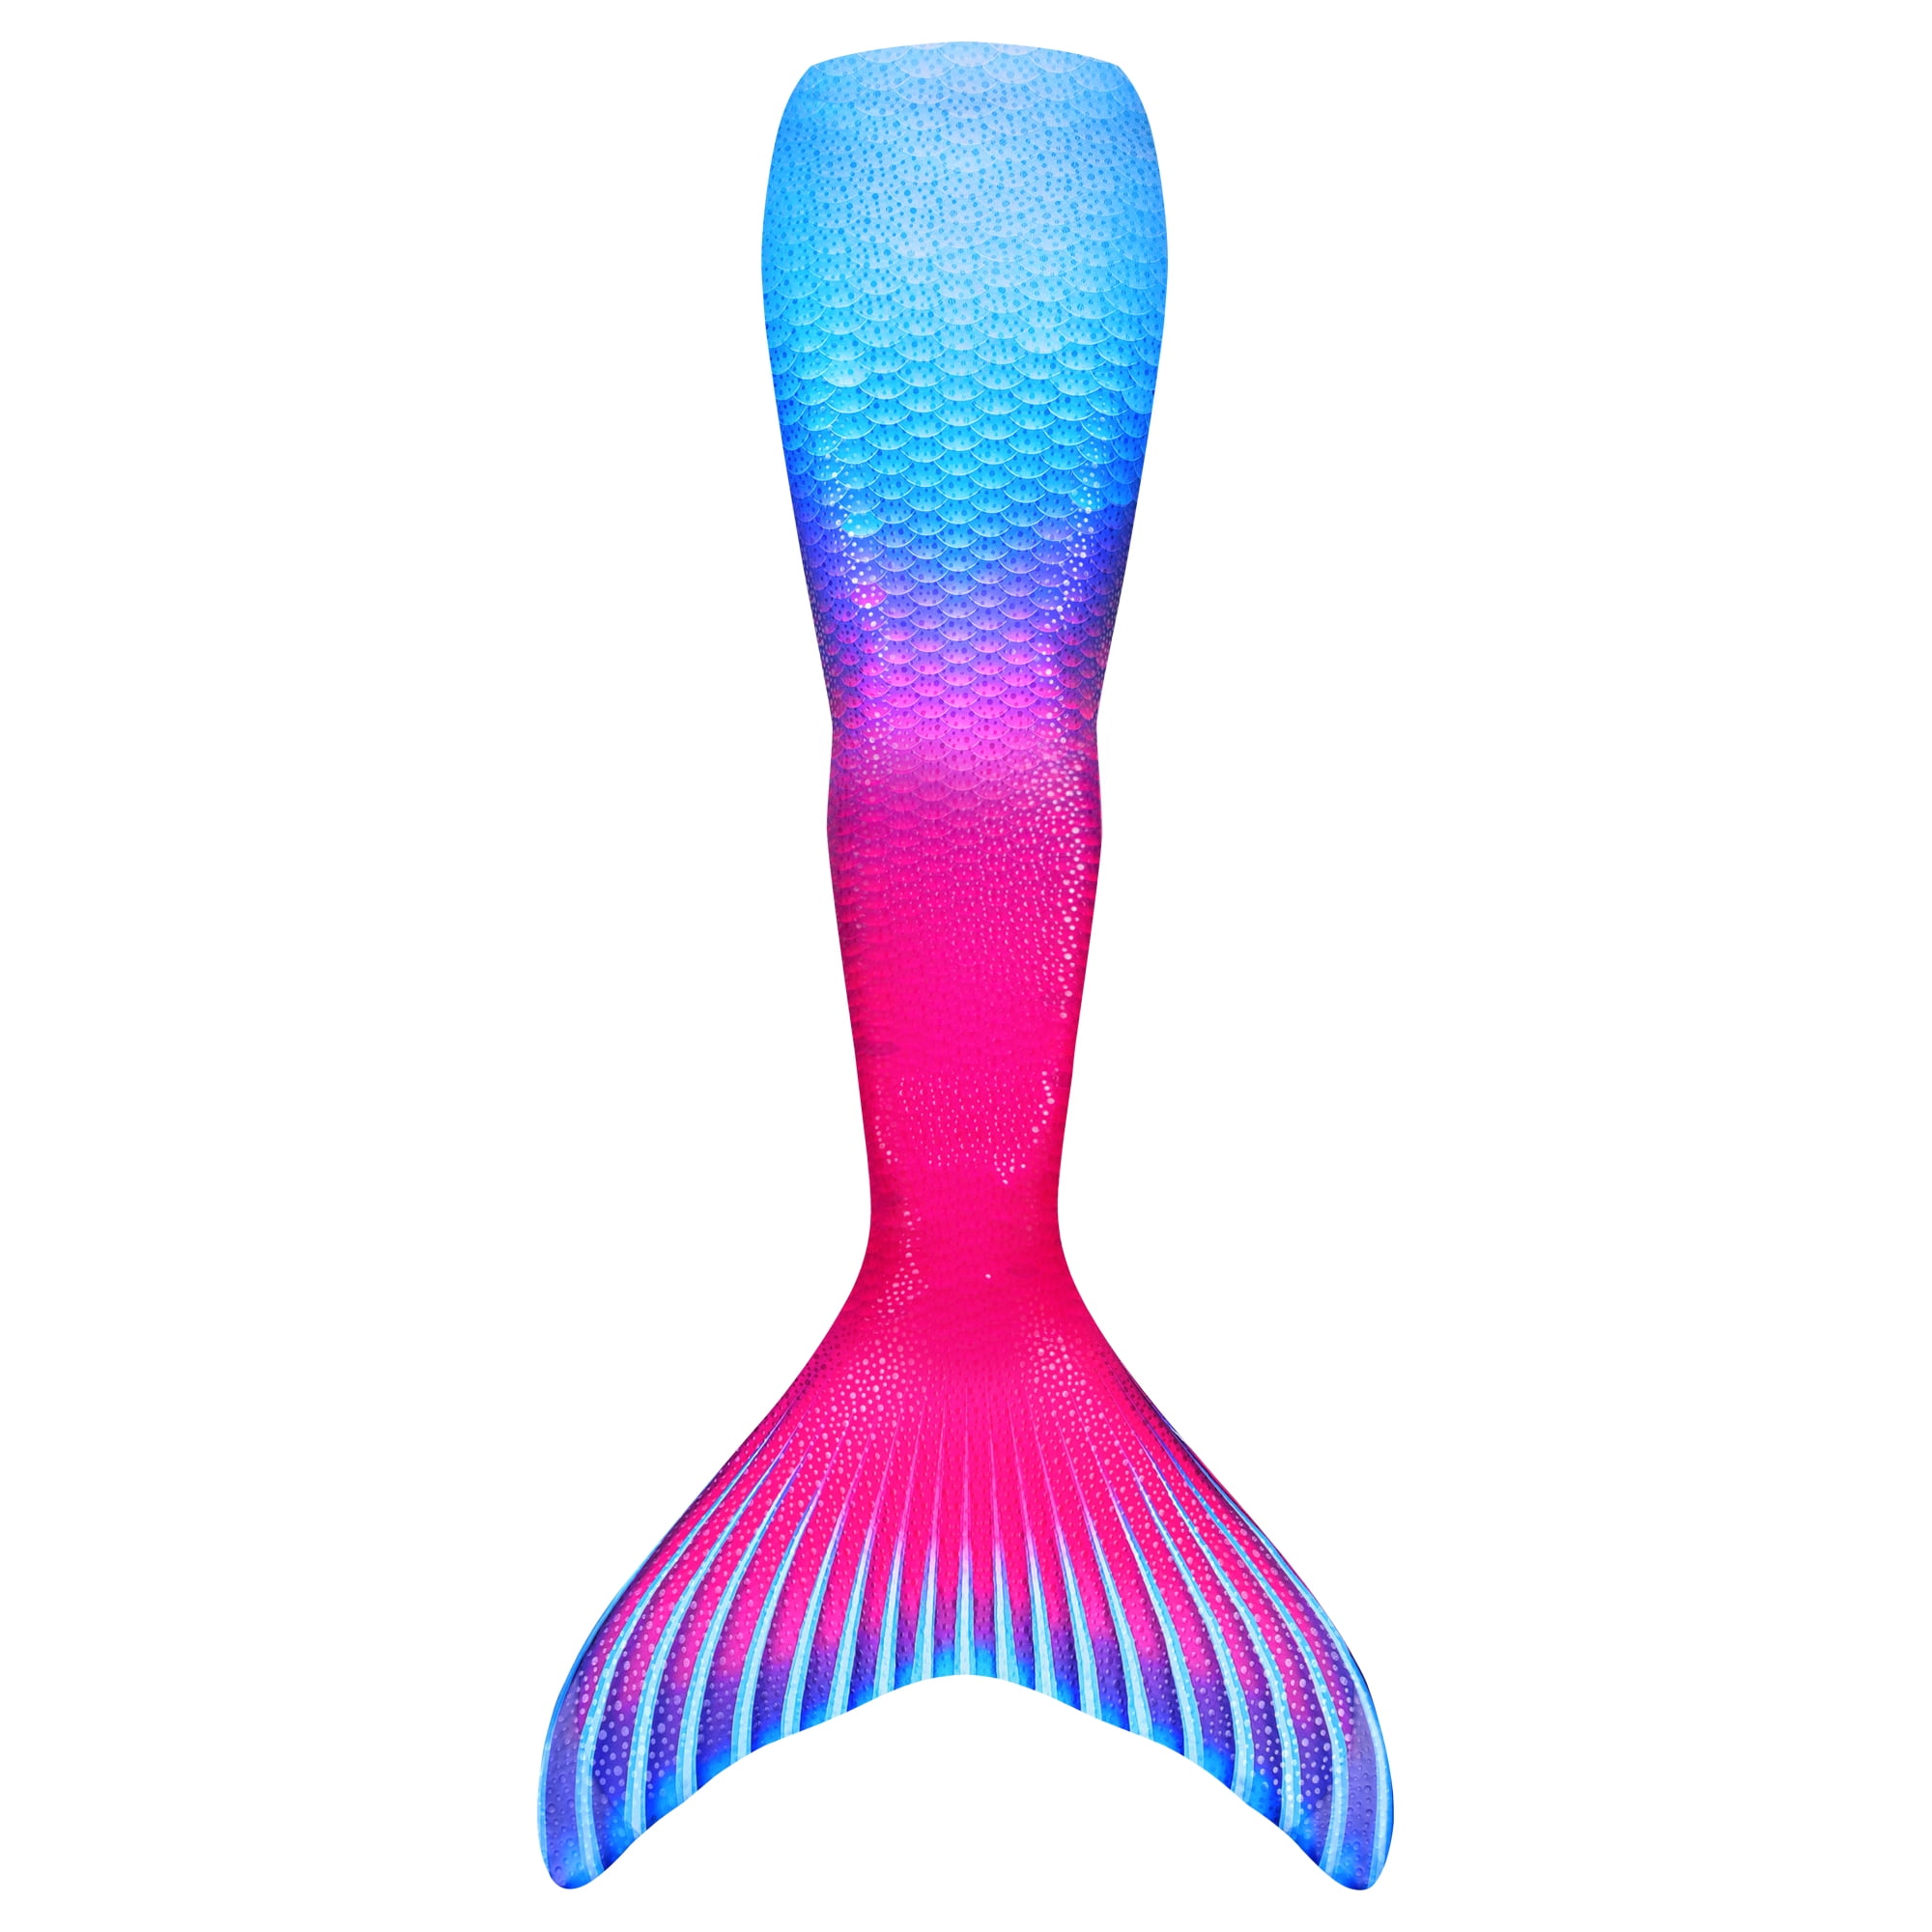 Monofin for Swimming Included Fin Fun Fantasy Mermaid Tail for Girls and Boys